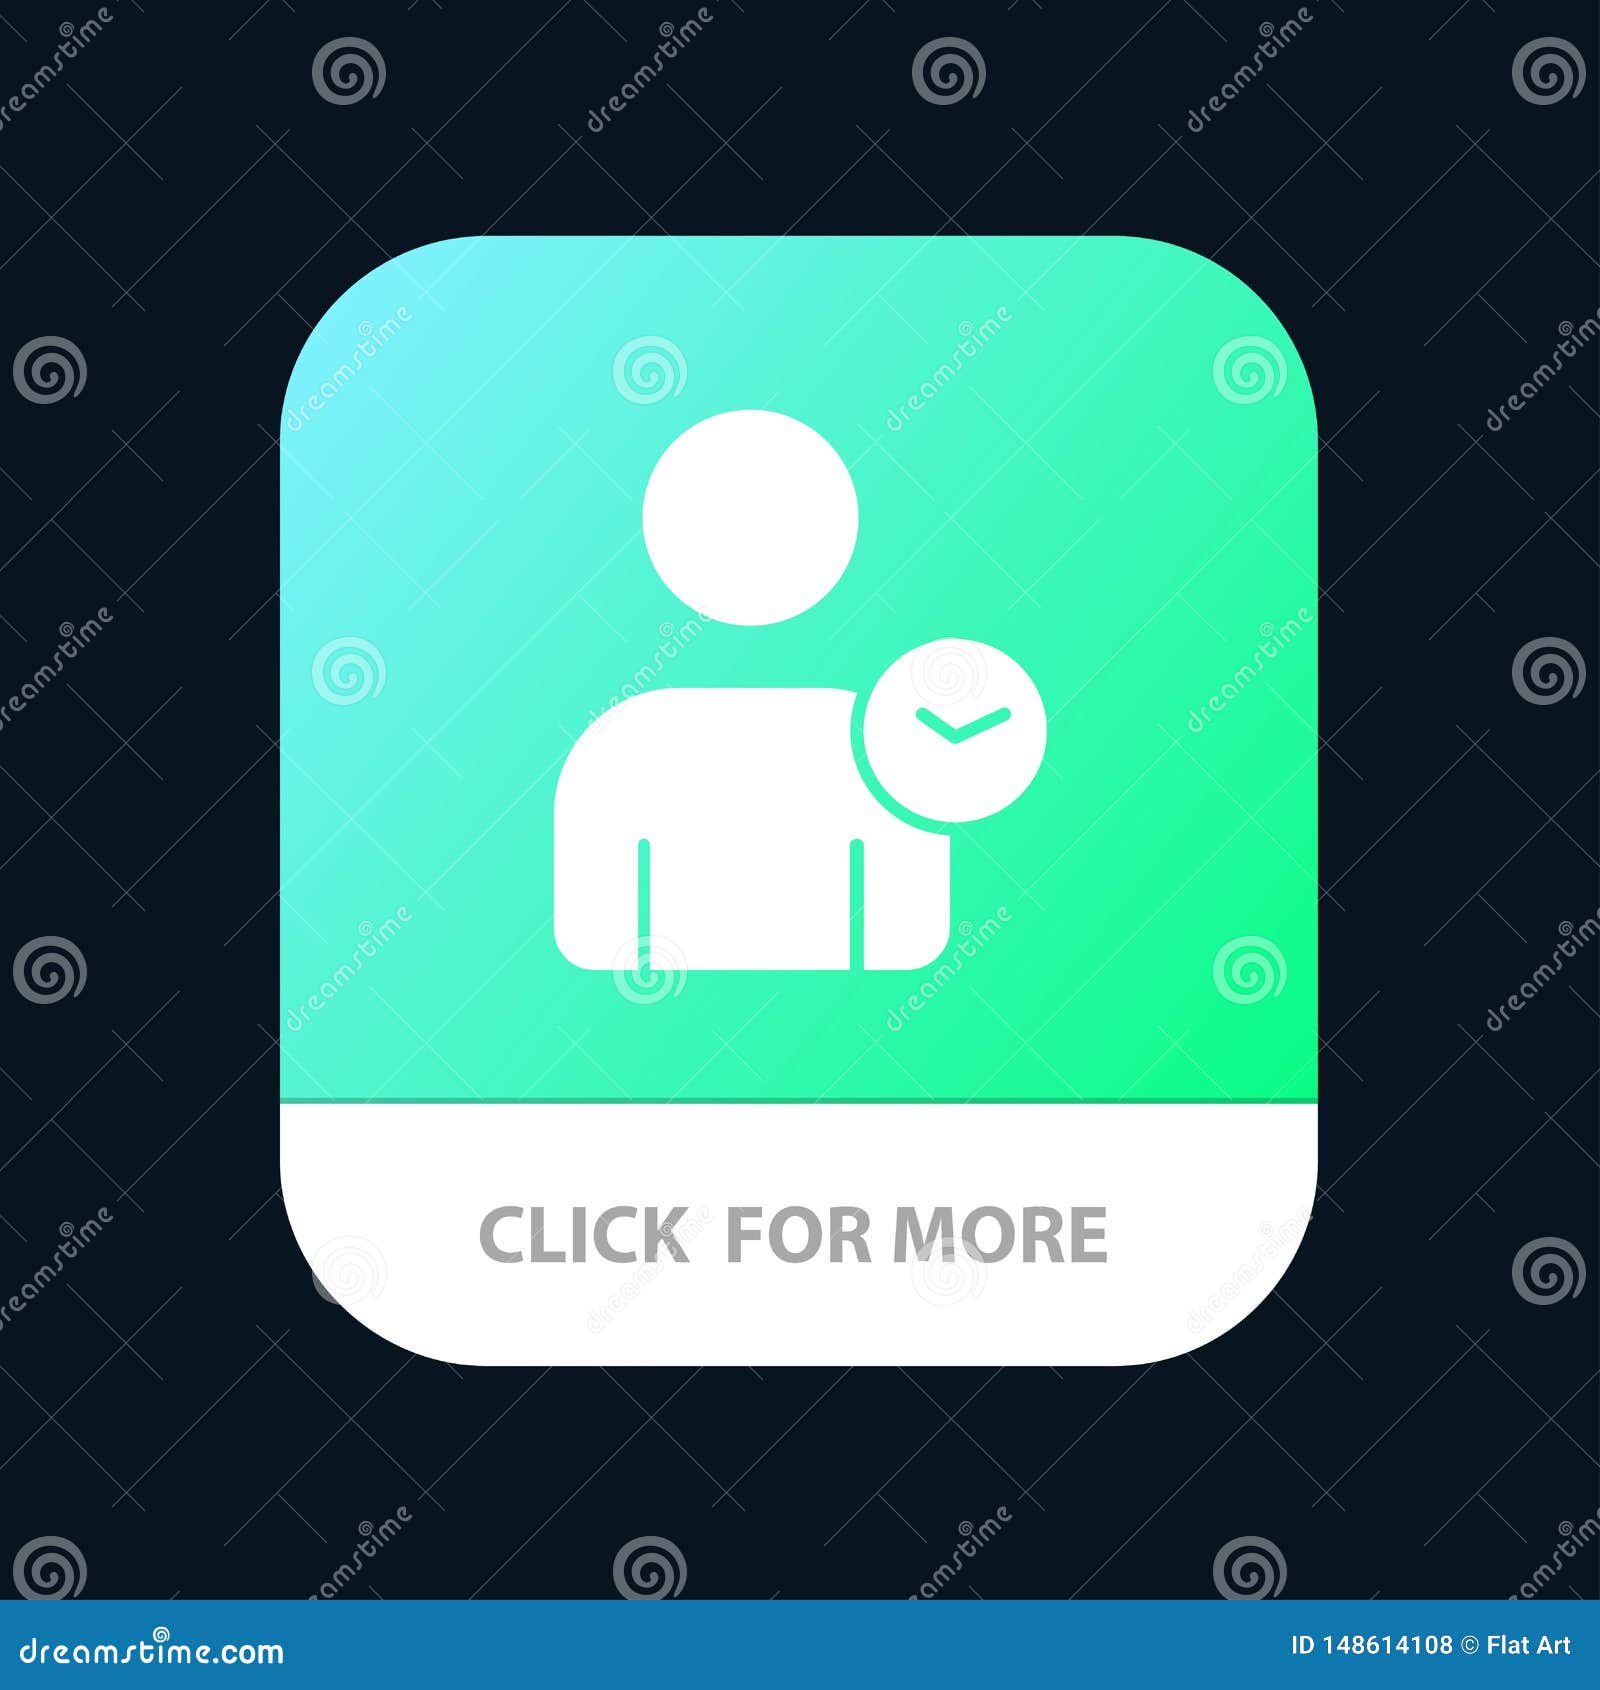 man, user, time, basic mobile app button. android and ios glyph version